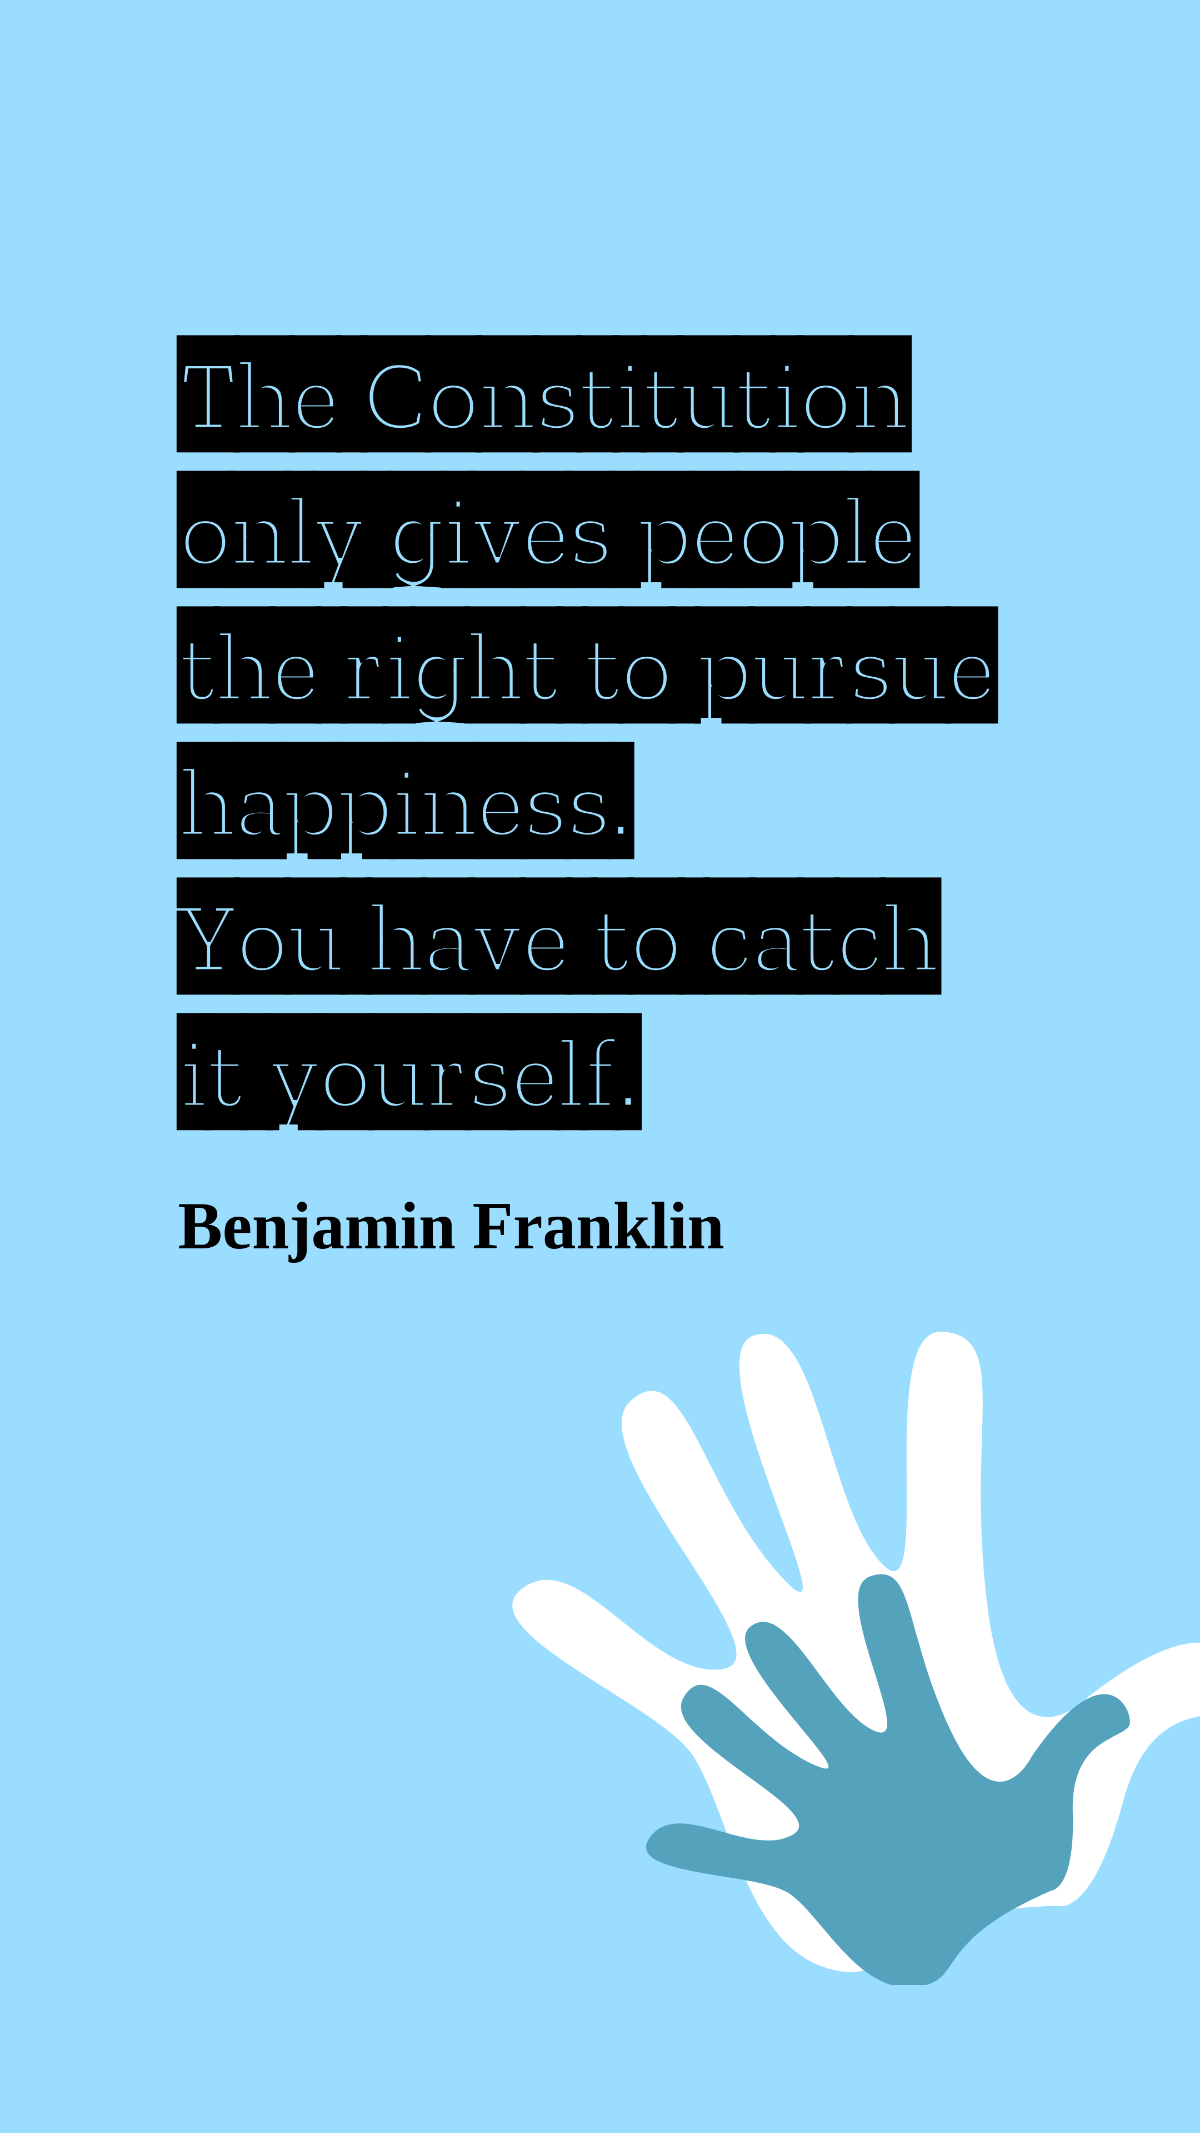 Benjamin Franklin - The Constitution only gives people the right to pursue happiness. You have to catch it yourself. Template